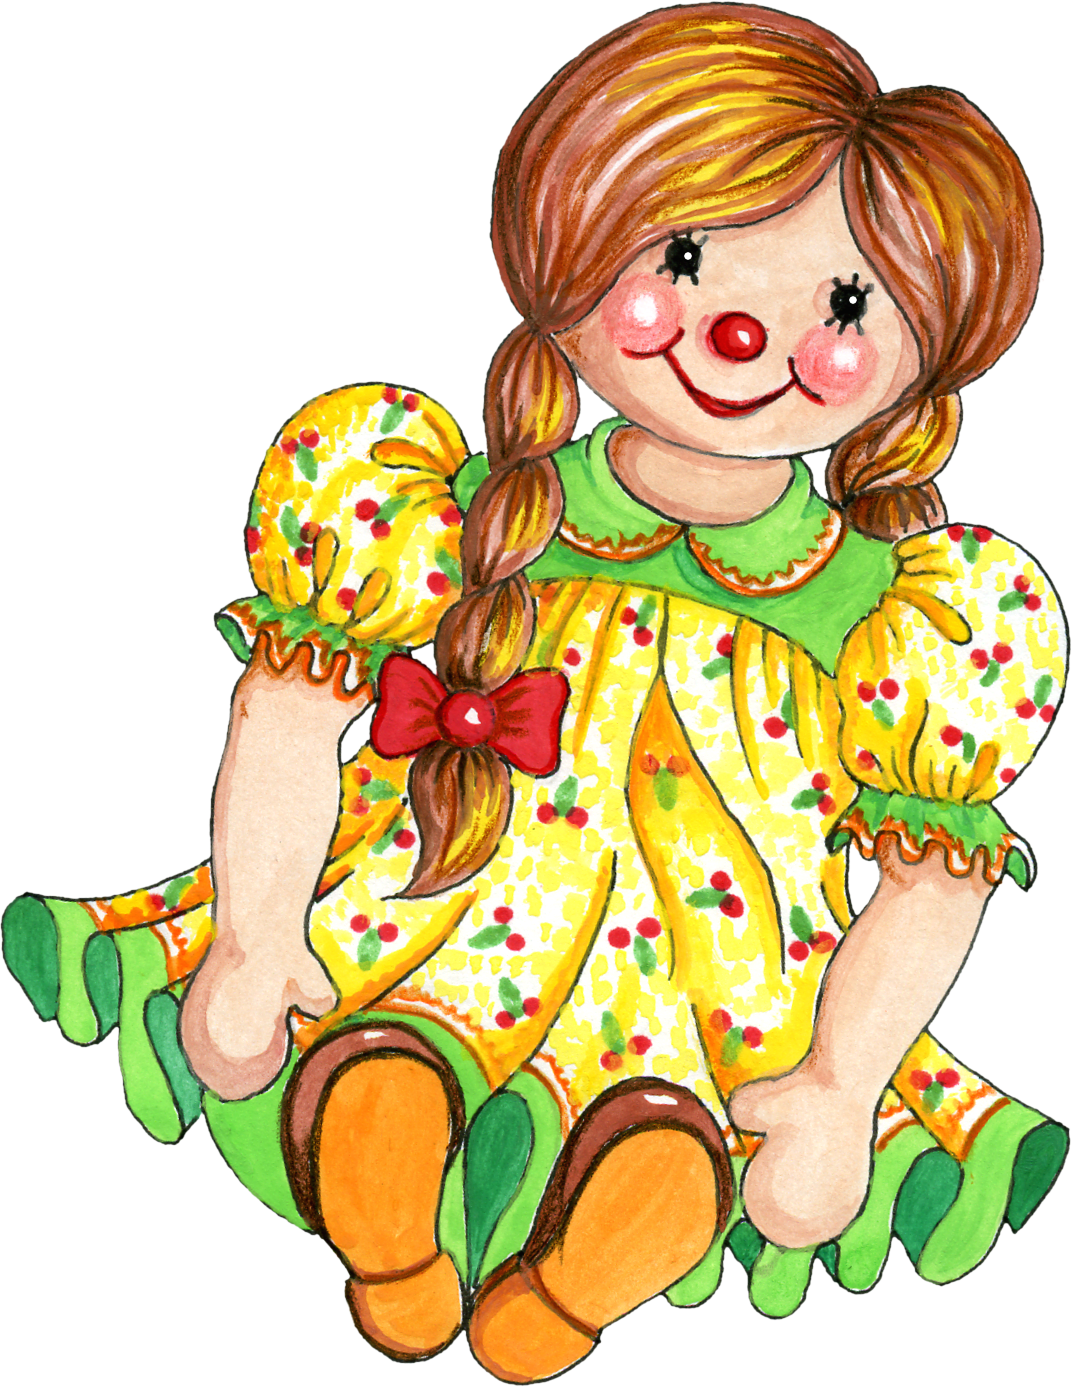 clipart of a doll - photo #33